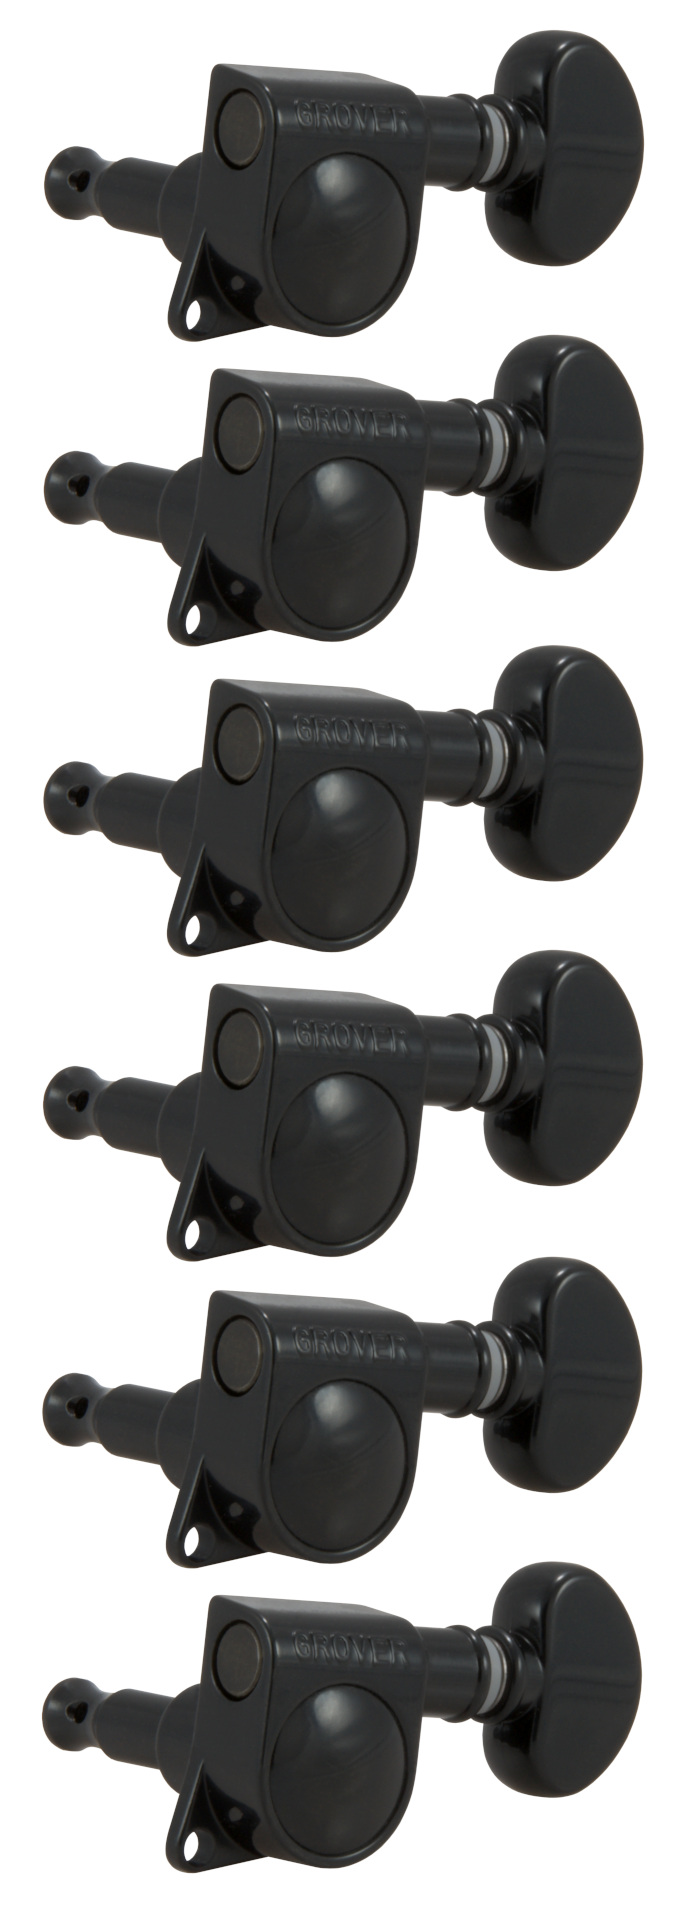 Grover 305BC6 Mid-Size Rotomatics with Round Button - Guitar Machine Heads, 6-in-Line, Bass Side (Left) - Black Chrome